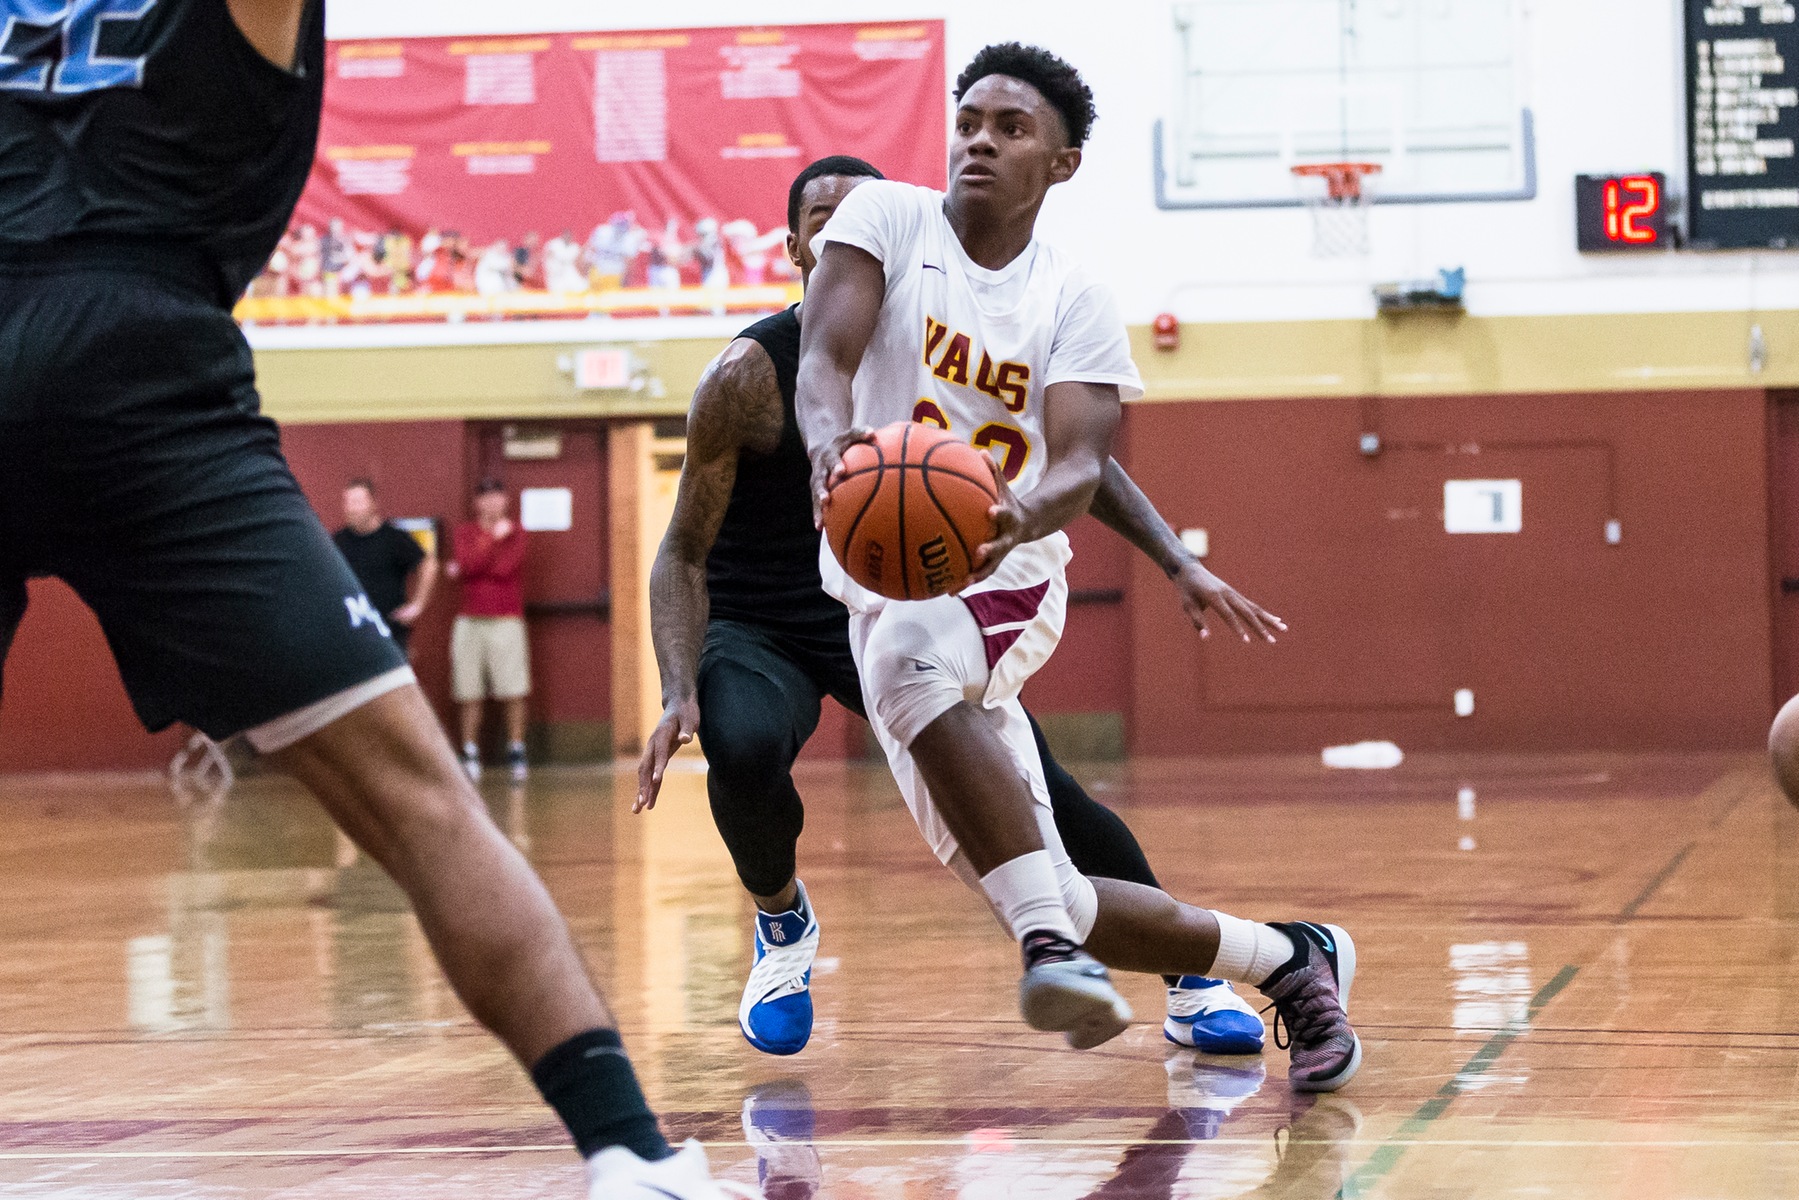 Shorthanded Glendale beats L.A. Valley 67-58 behind 27 points from Isaac Etter